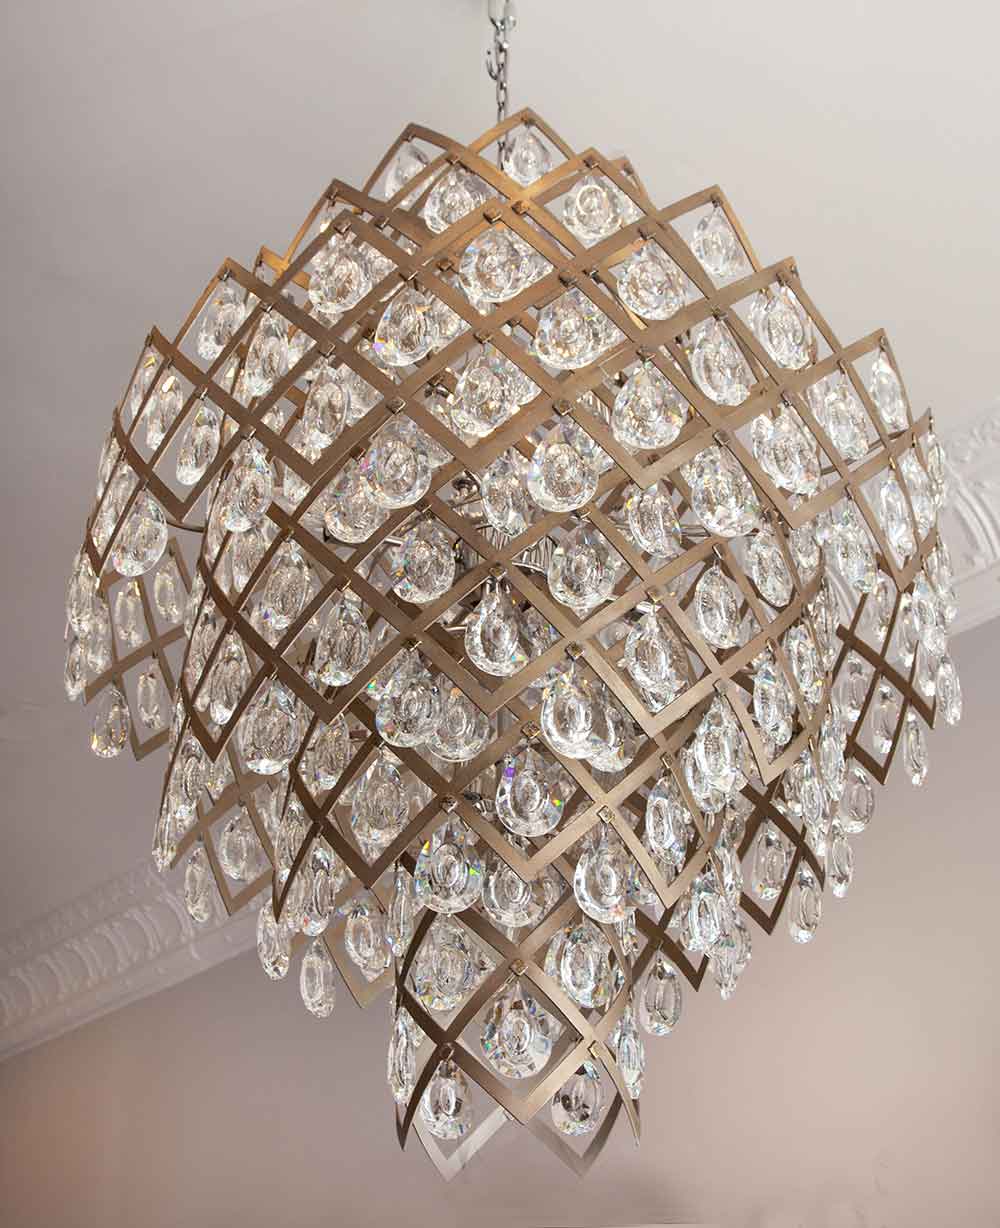 Five-Tiered Crystal Chandelier